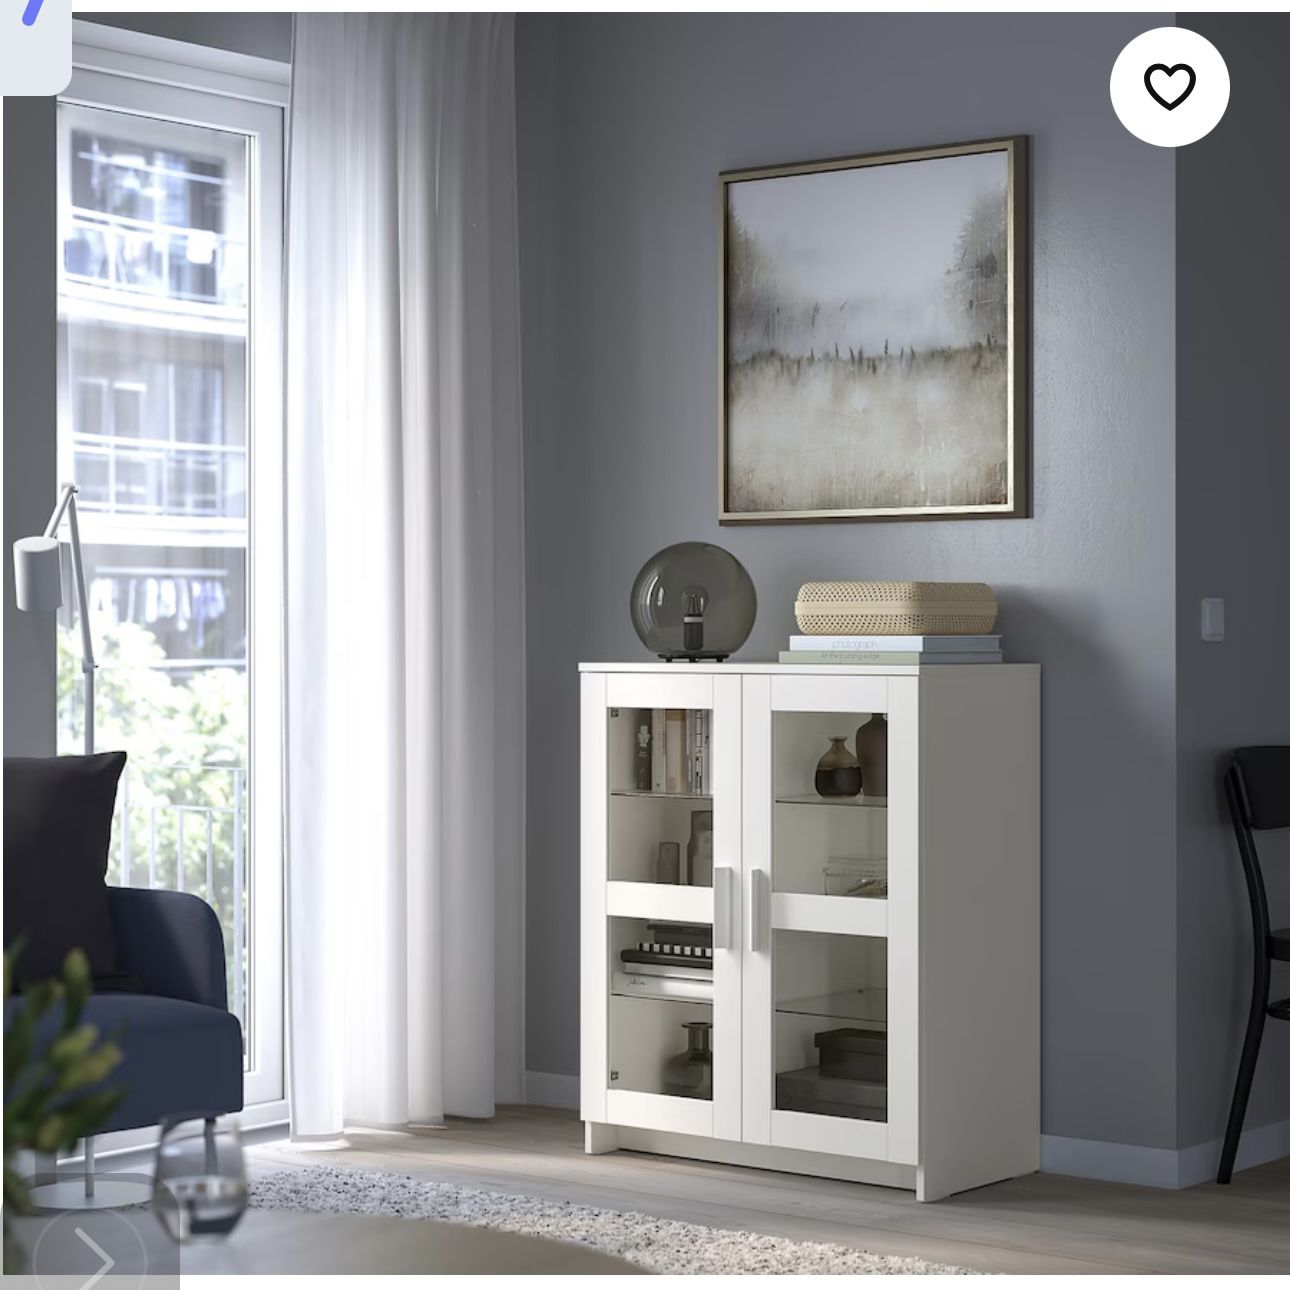 BRIMNES Cabinet with doors, glass/white, 30 3/4x37 3/8 "